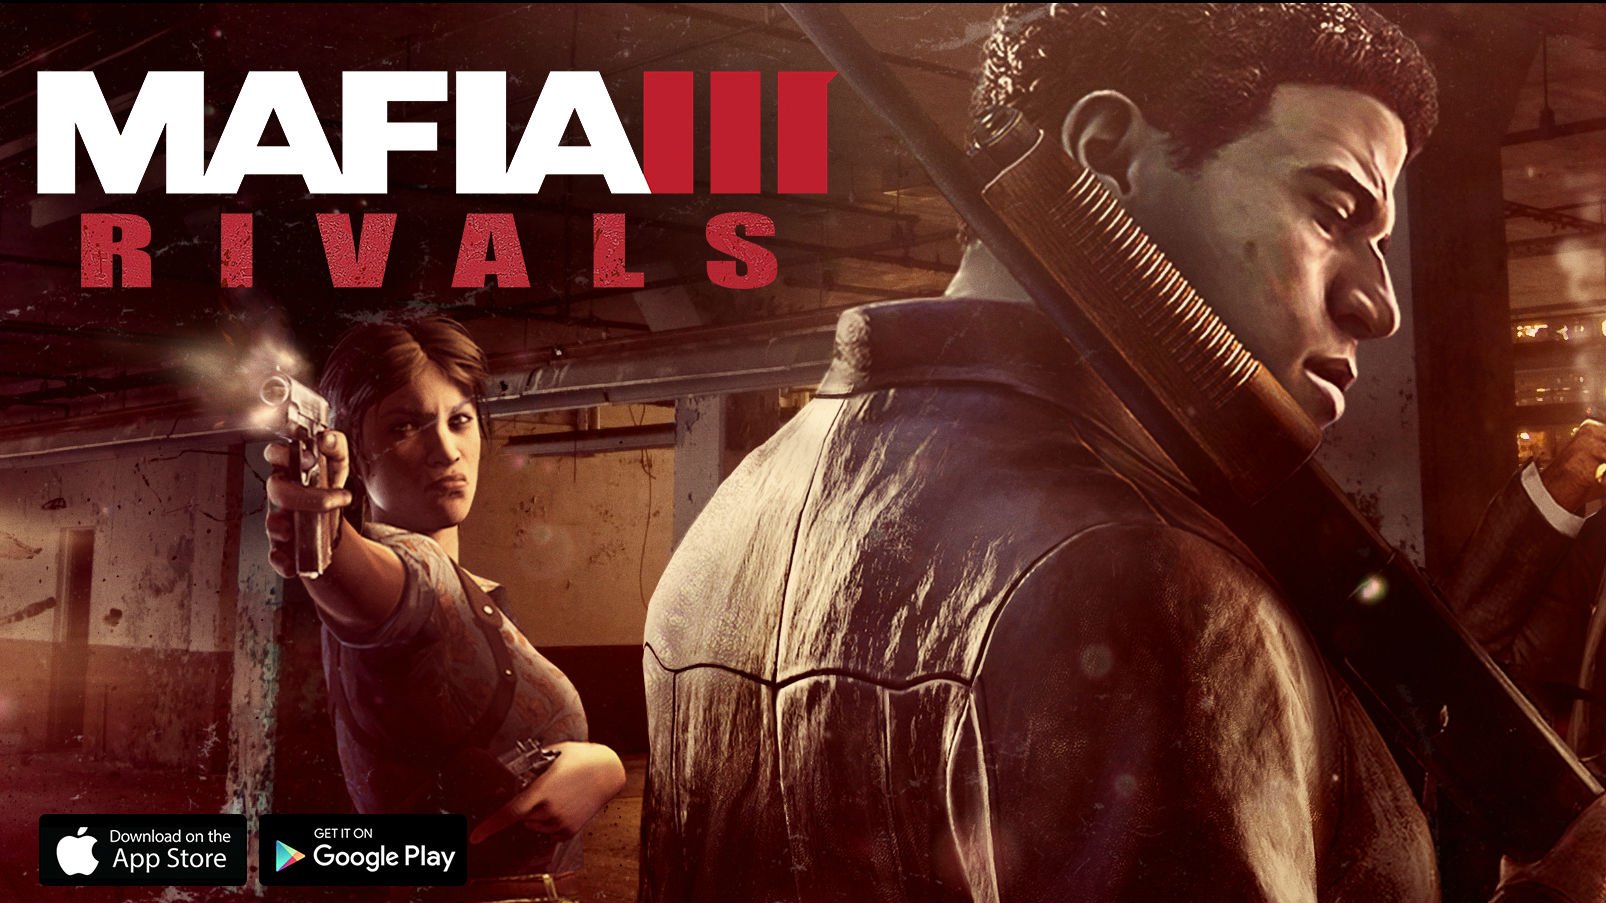 Mafia III: Rivals Takes Over on iOS and Android October 7